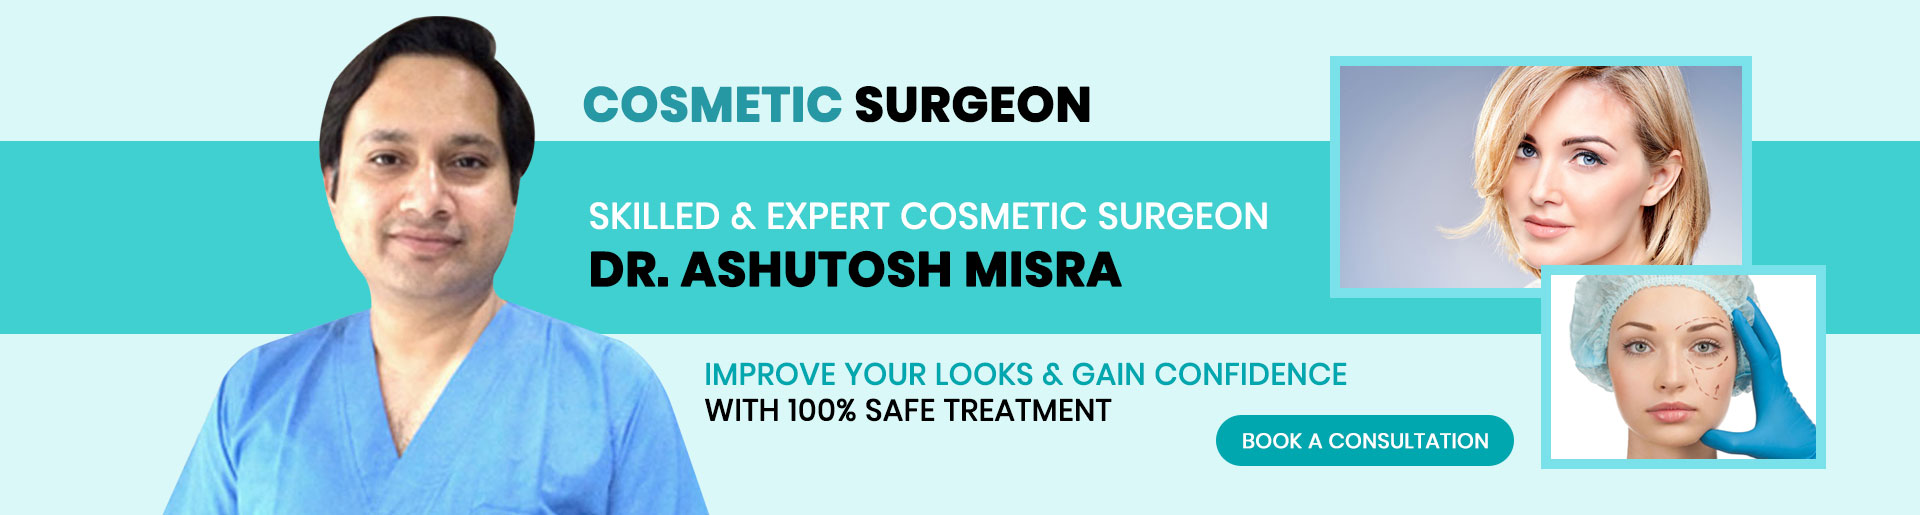 Best Cosmetic Surgeon in India